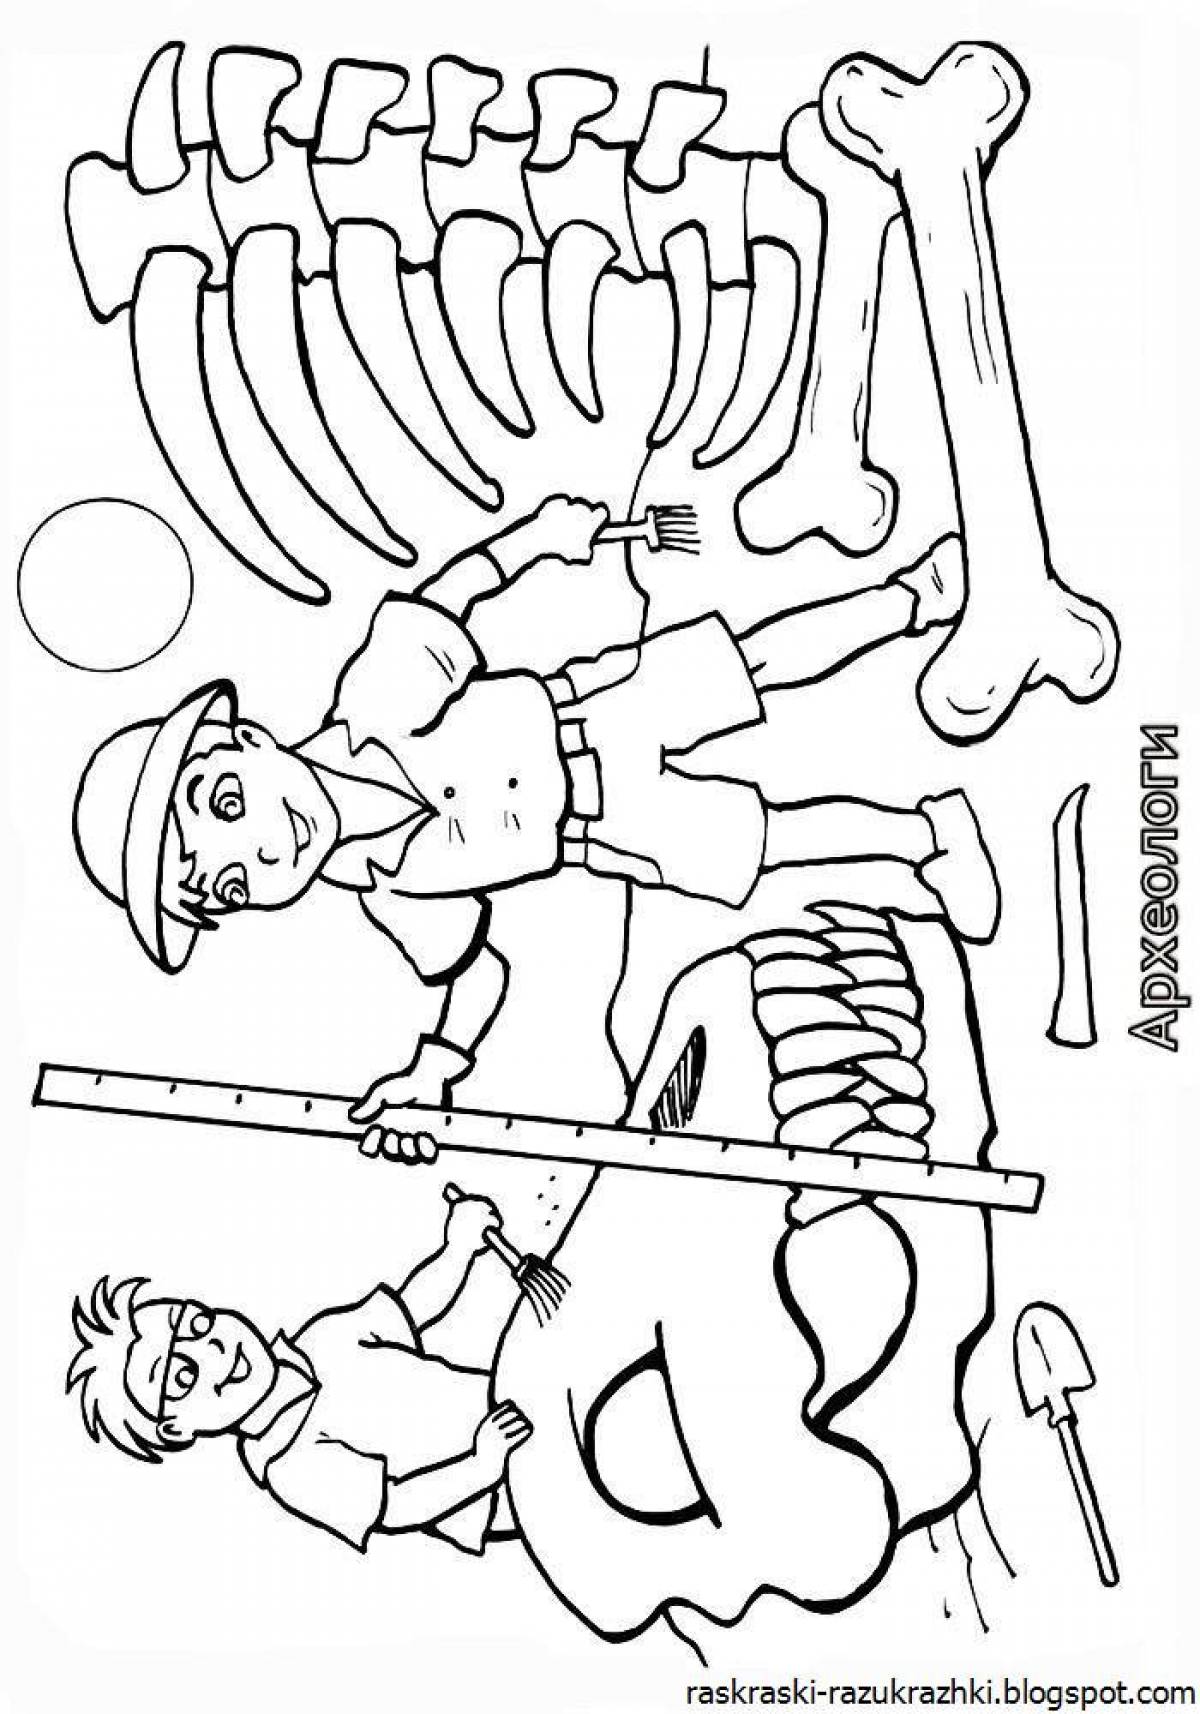 Fun job coloring pages for 6-7 year olds